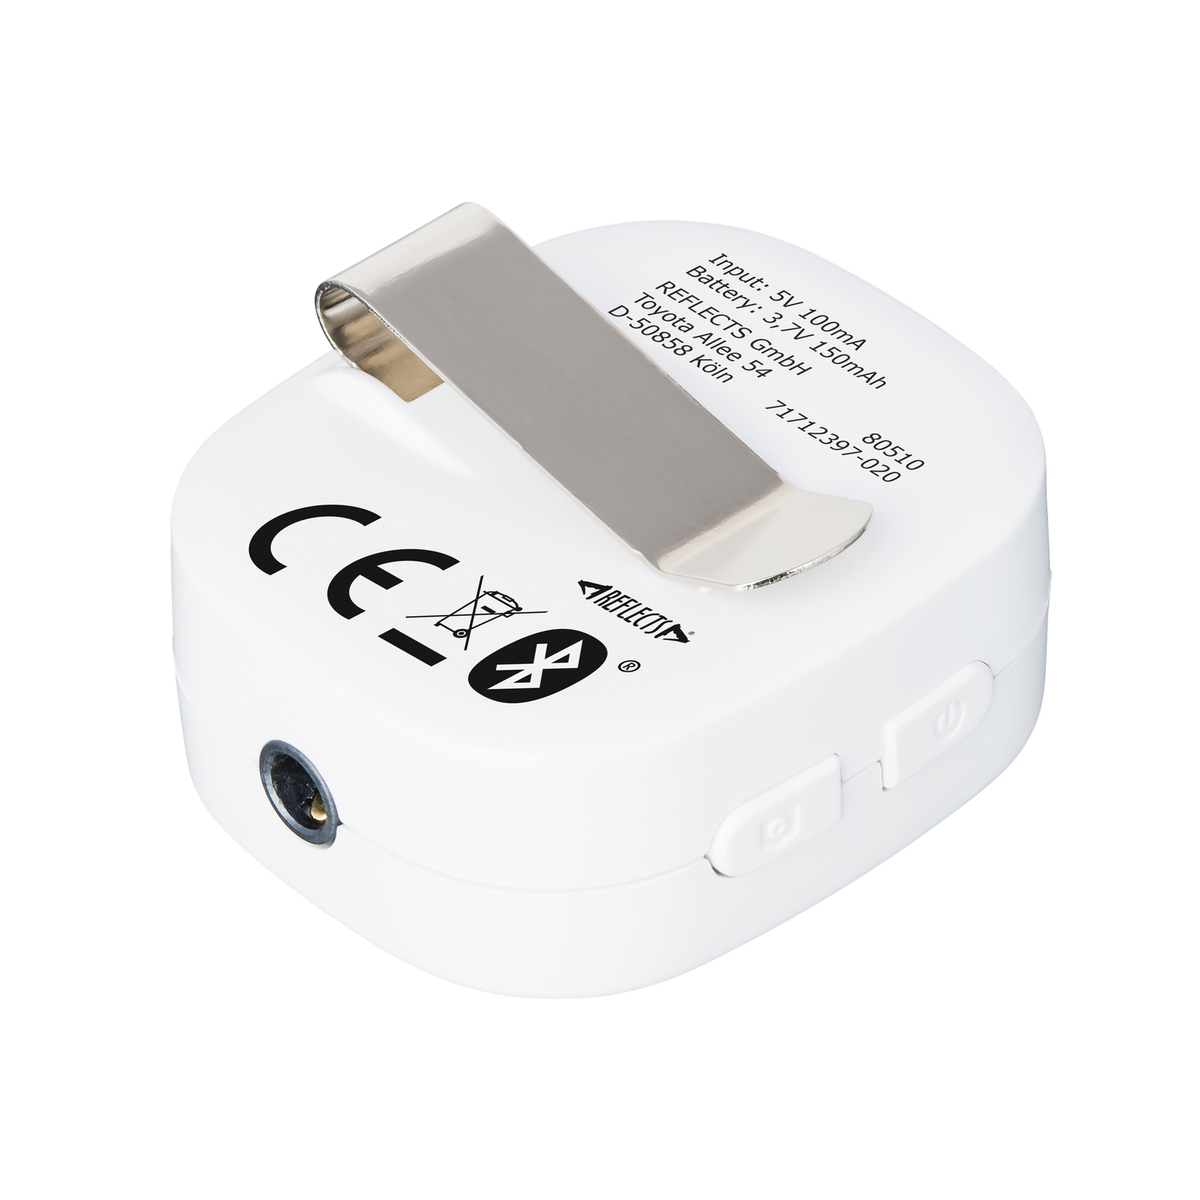 Promotional Bluetooth® adapter RC500 